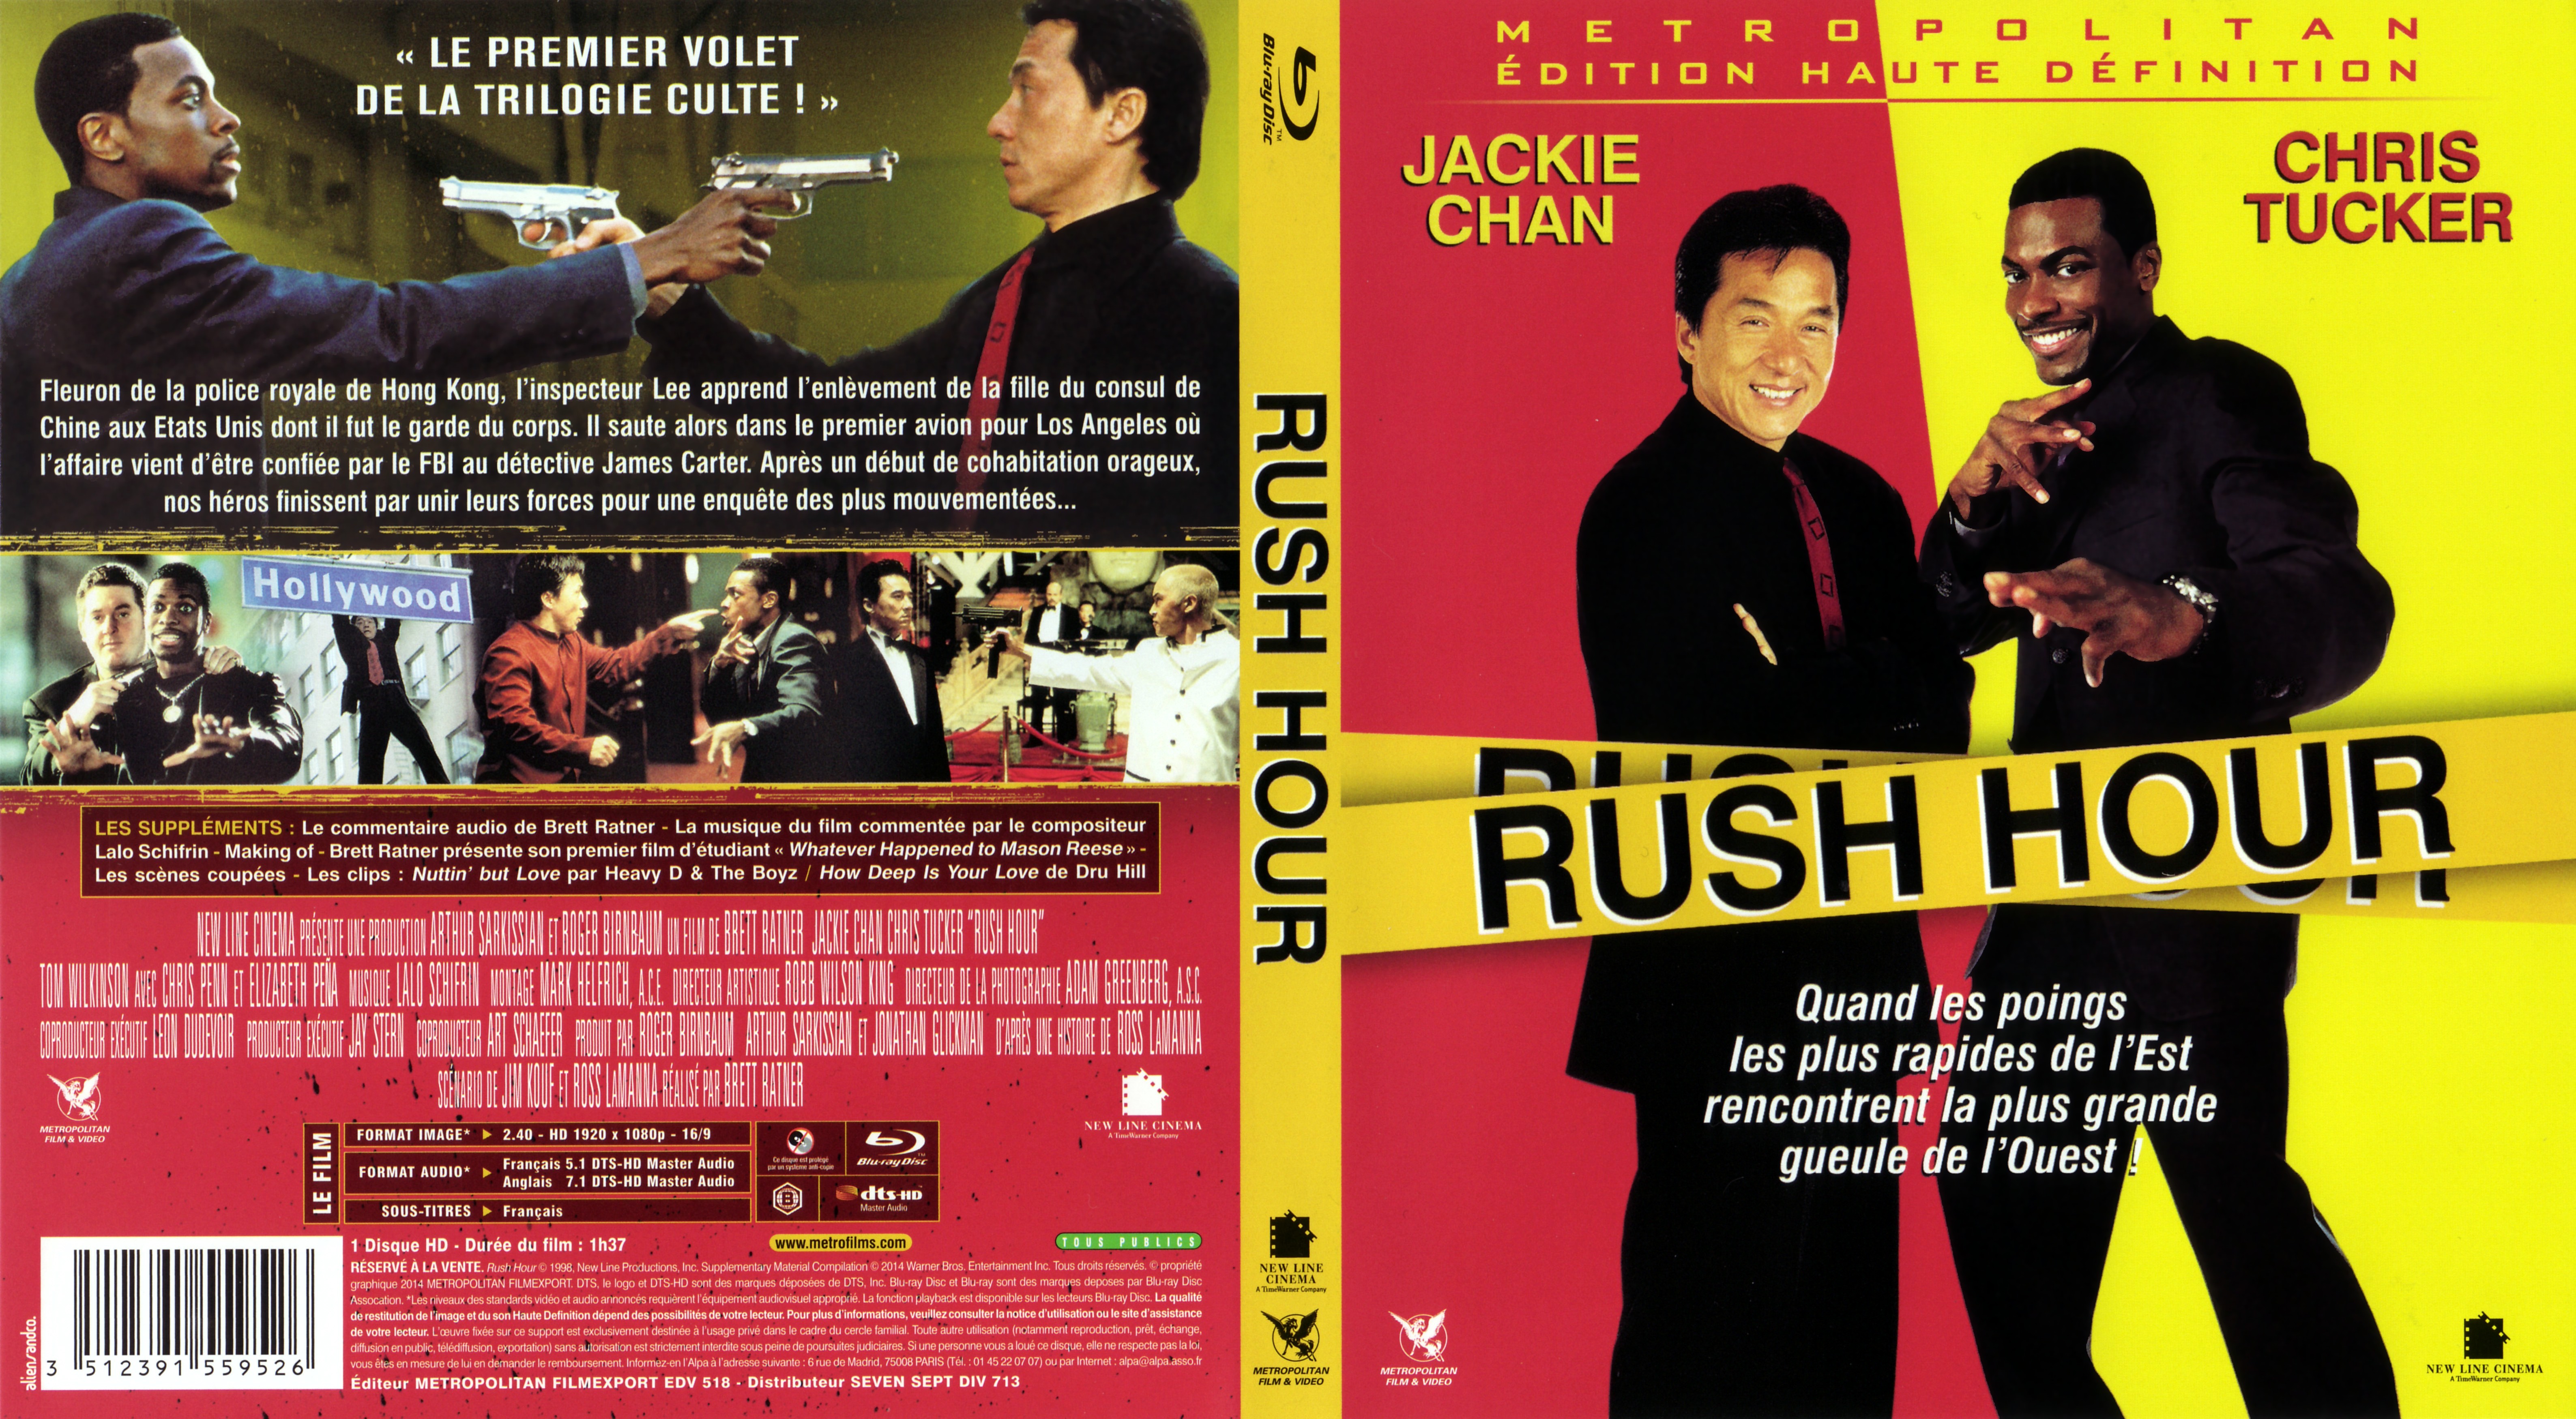 Jaquette DVD Rush hour (BLU-RAY)